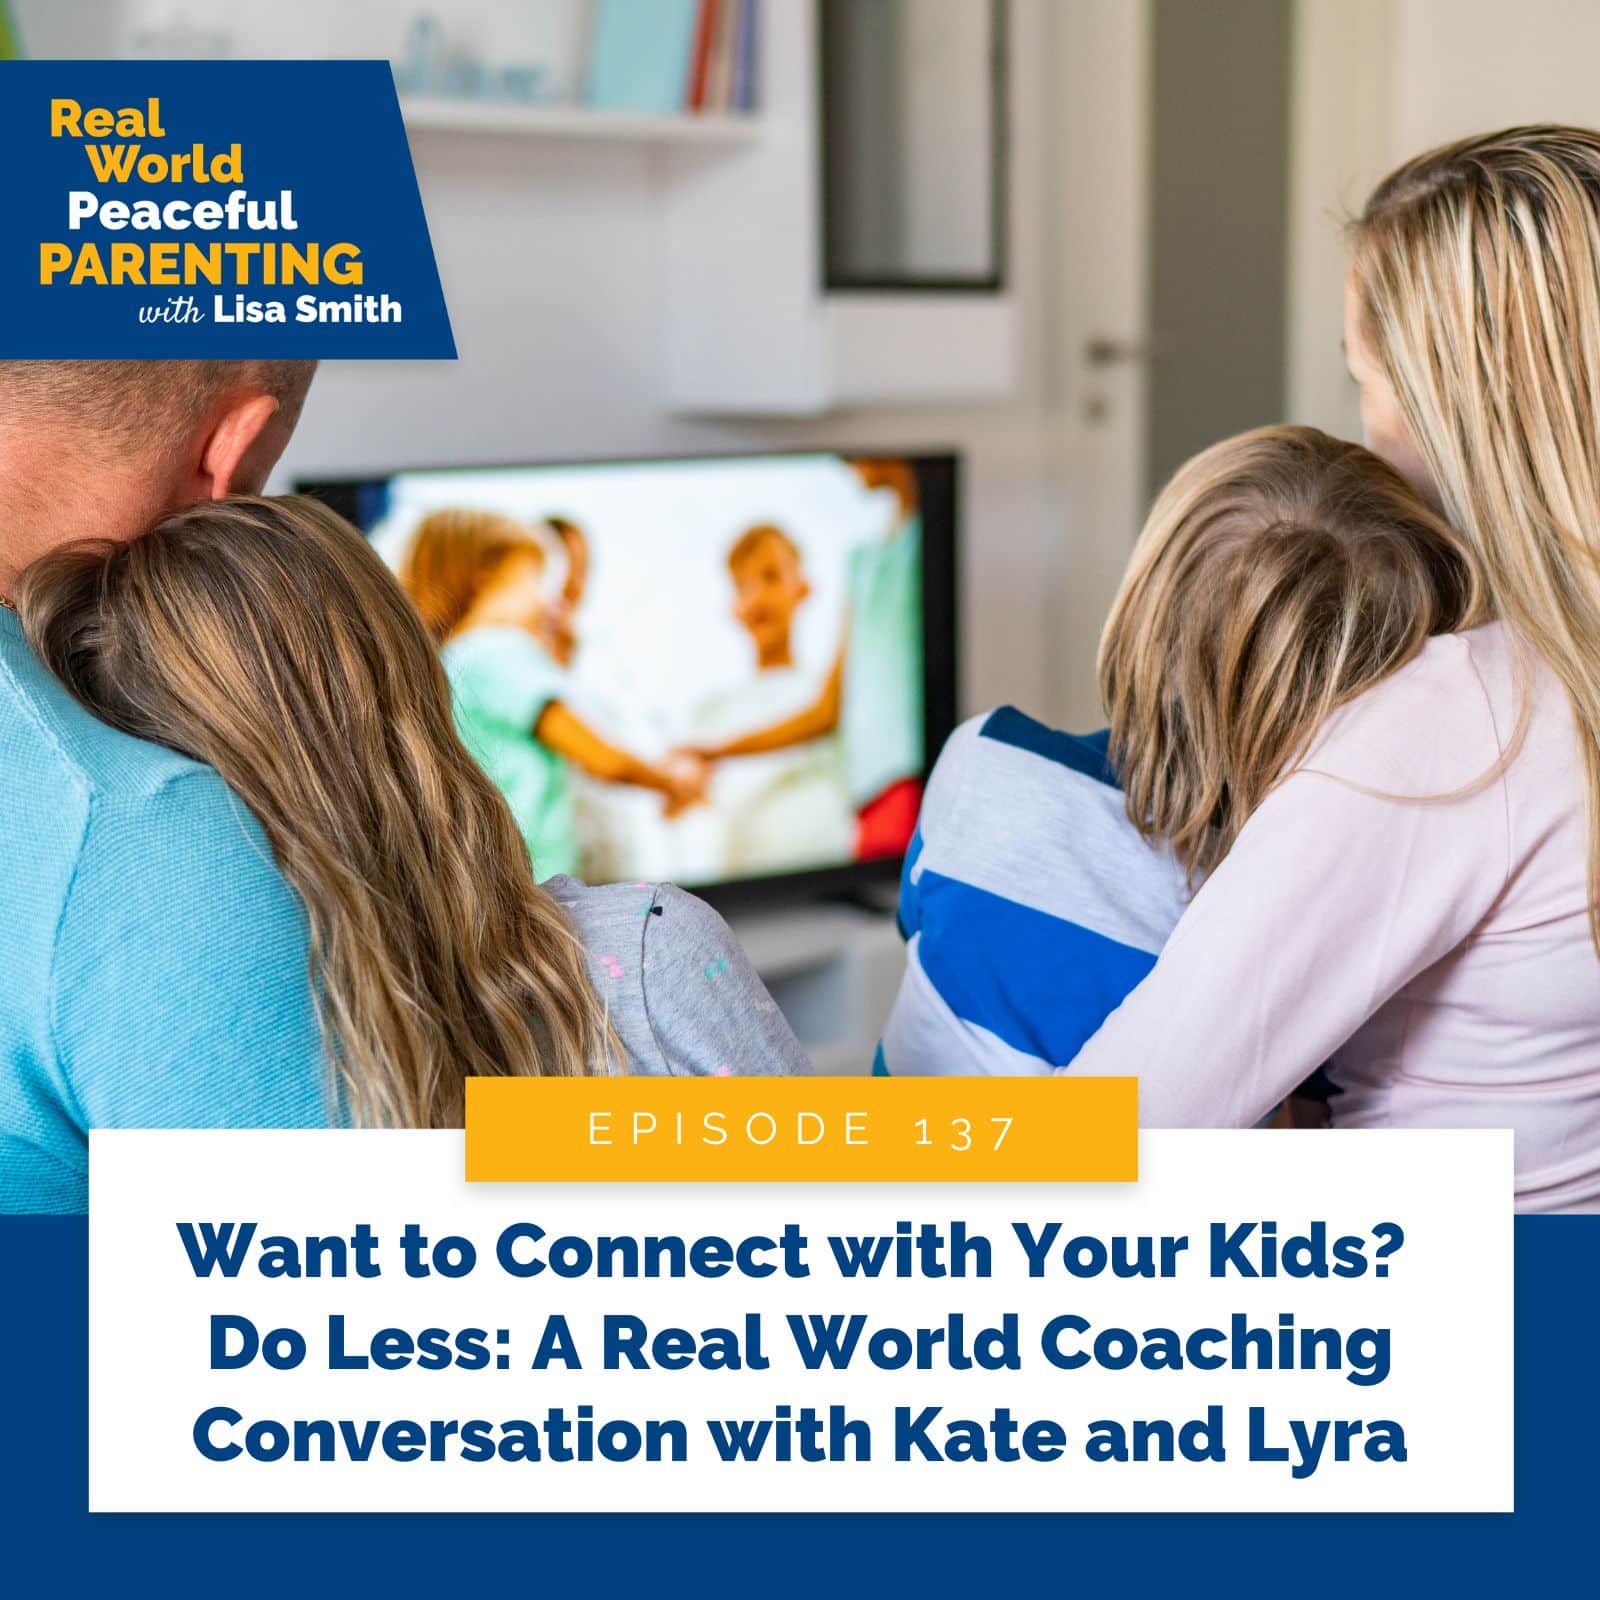 Real World Peaceful Parenting Lisa Smith | Want to Connect with Your Kids? Do Less: A Real World Coaching Conversation with Kate and Lyra